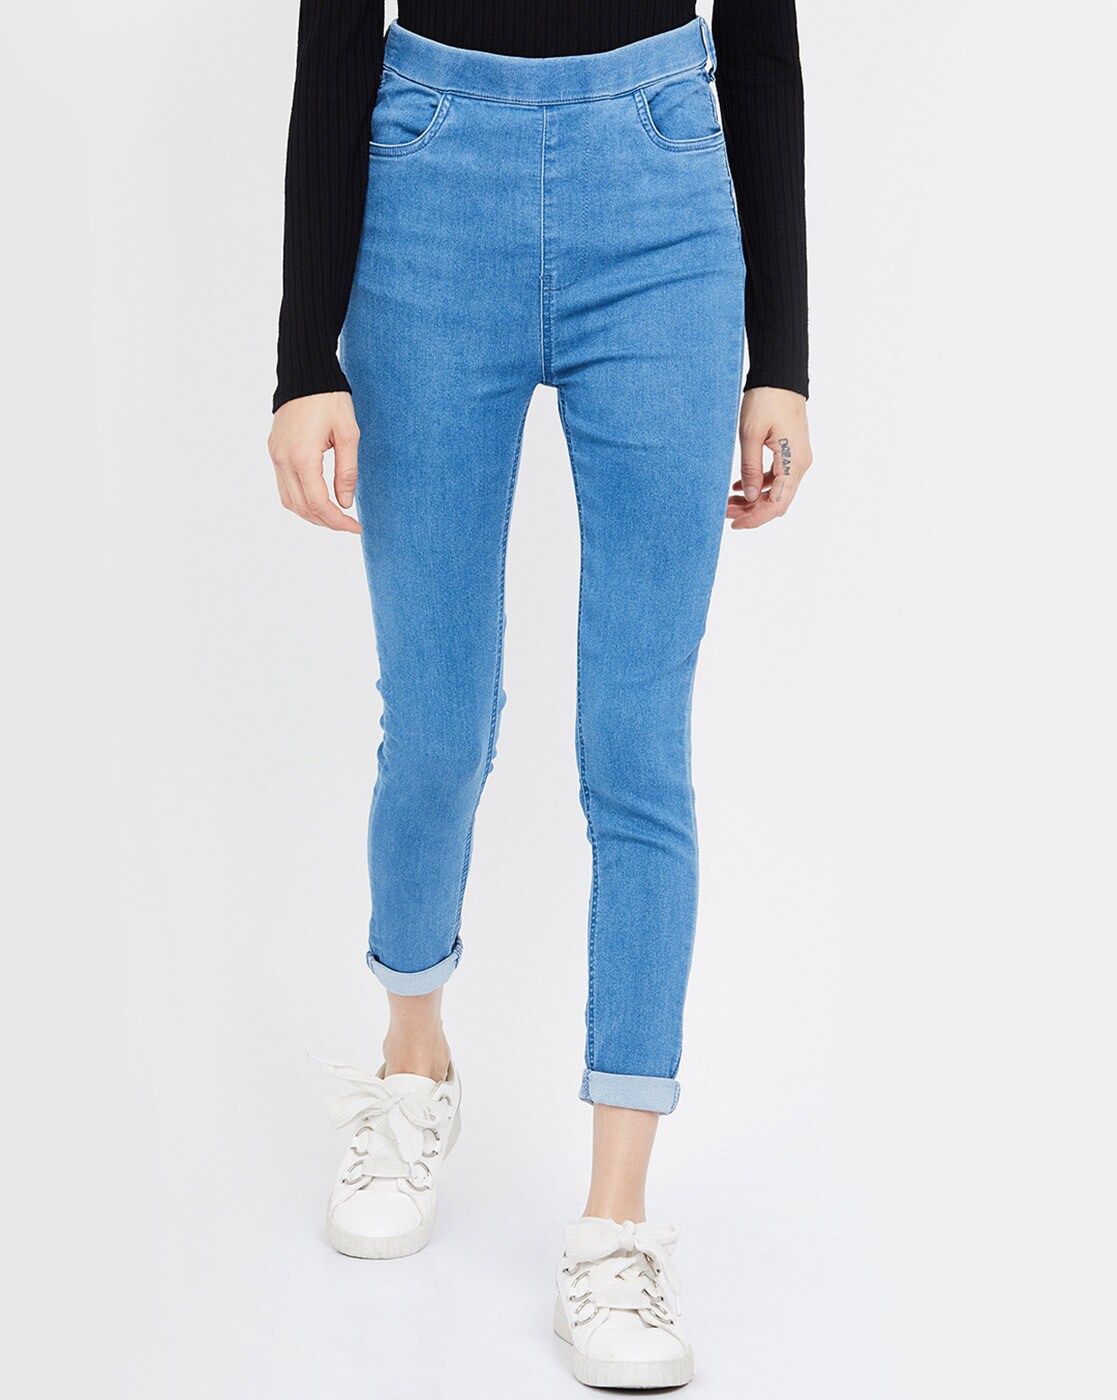 Buy Blue Jeans & Jeggings for Women by Ginger by lifestyle Online